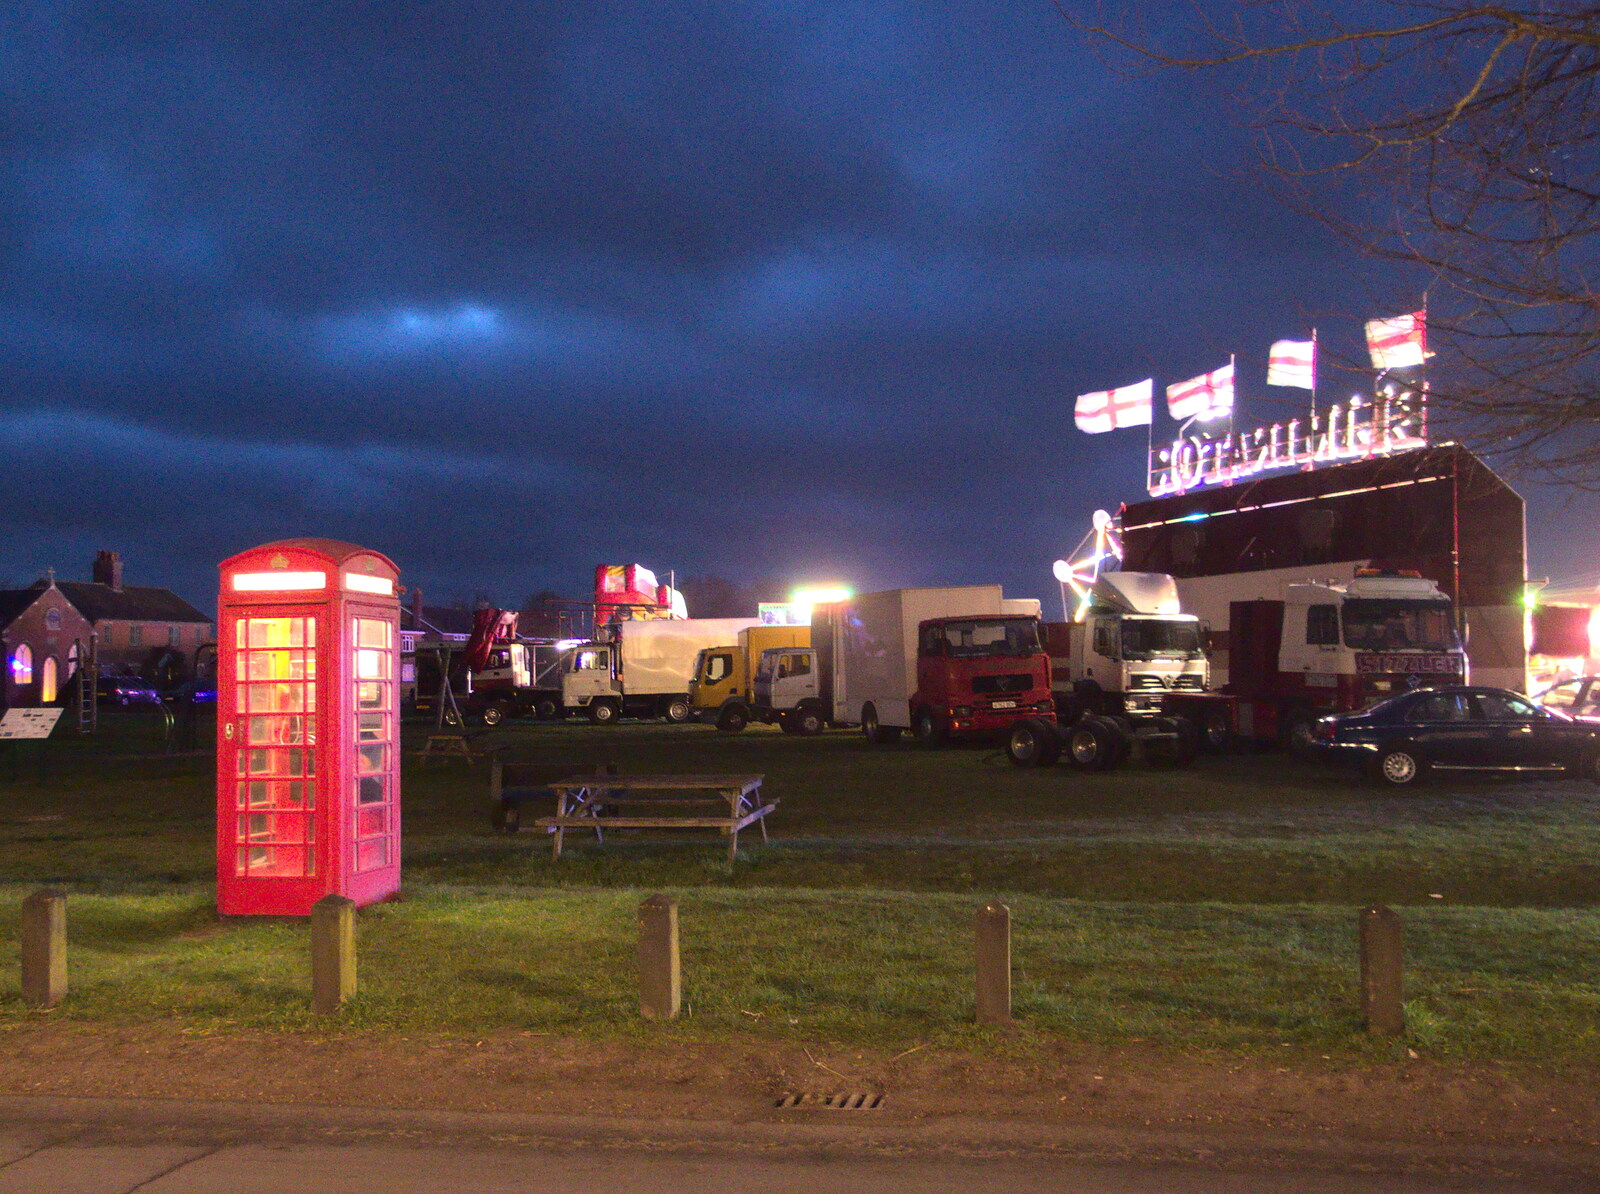 K6 phone box and the fair on Fair Green from The Last Day of Pre-School and Beer at the Trowel and Hammer, Cotton, Suffolk - 29th March 2015